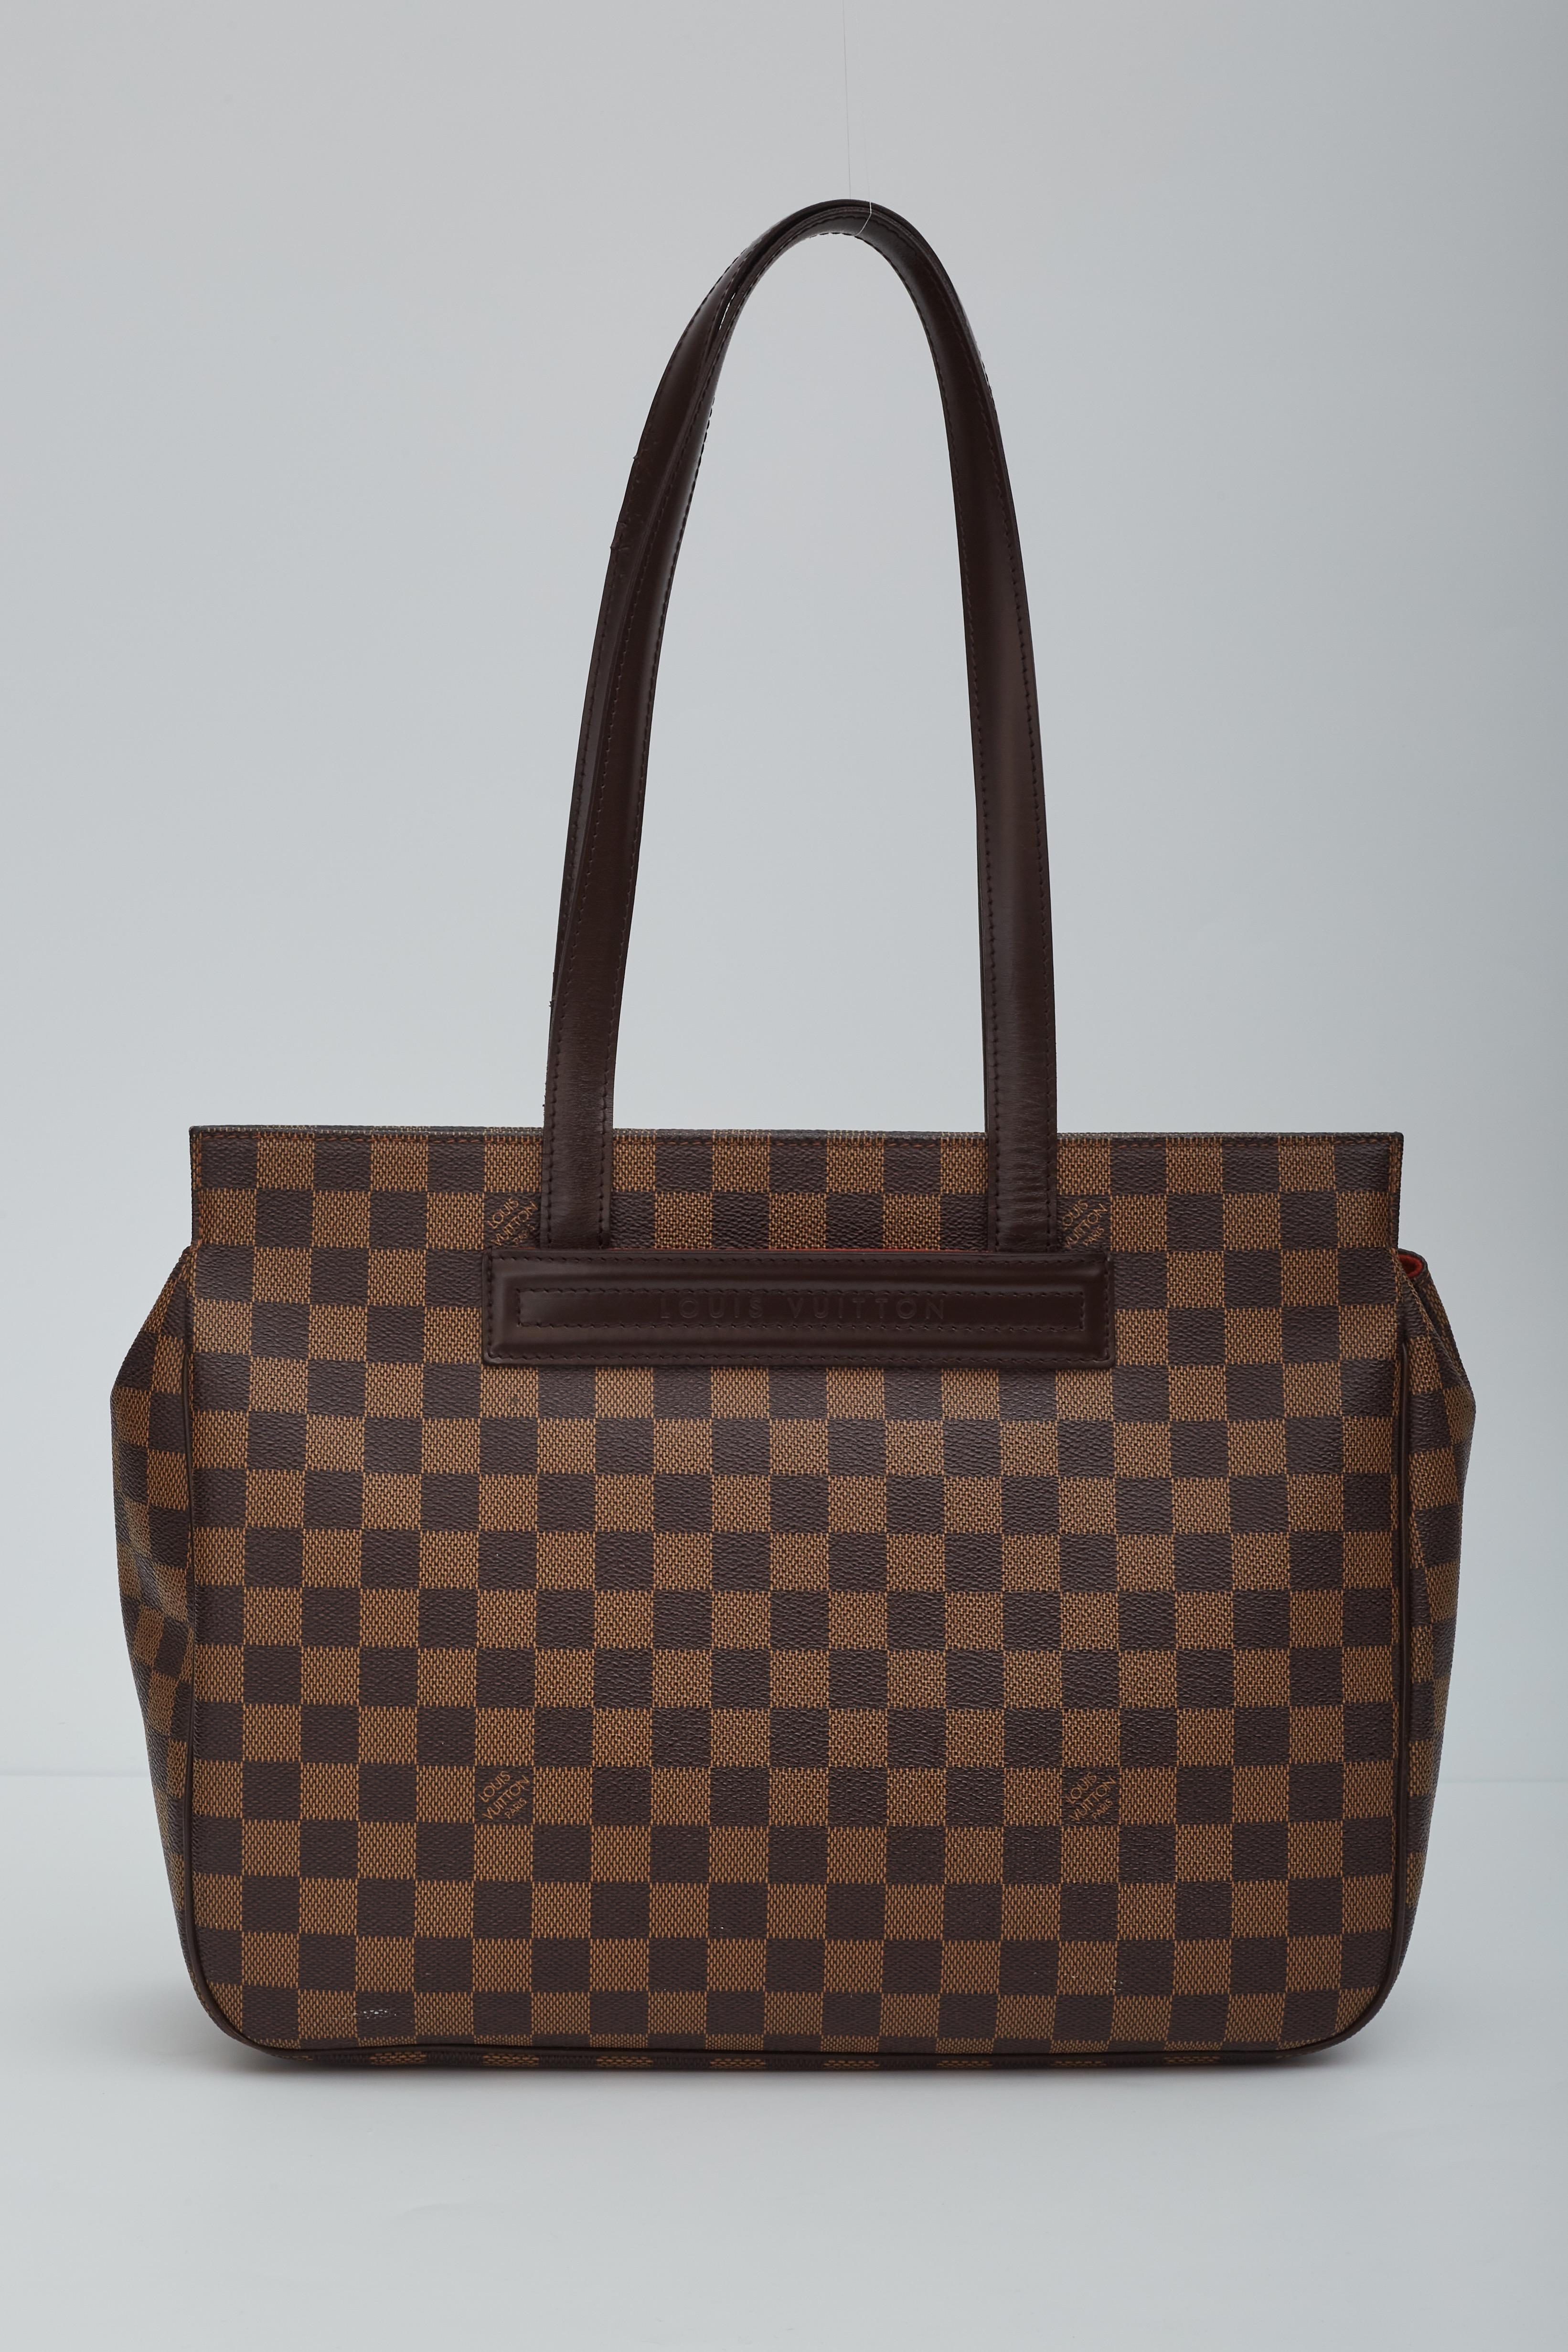 This bag is made with signature damier ebène coated canvas canvas. The bag features dual long top handles, a top that opens and snaps back to place and brown leather trim. the interior is finished with red woven fabric lining with slip pockets.